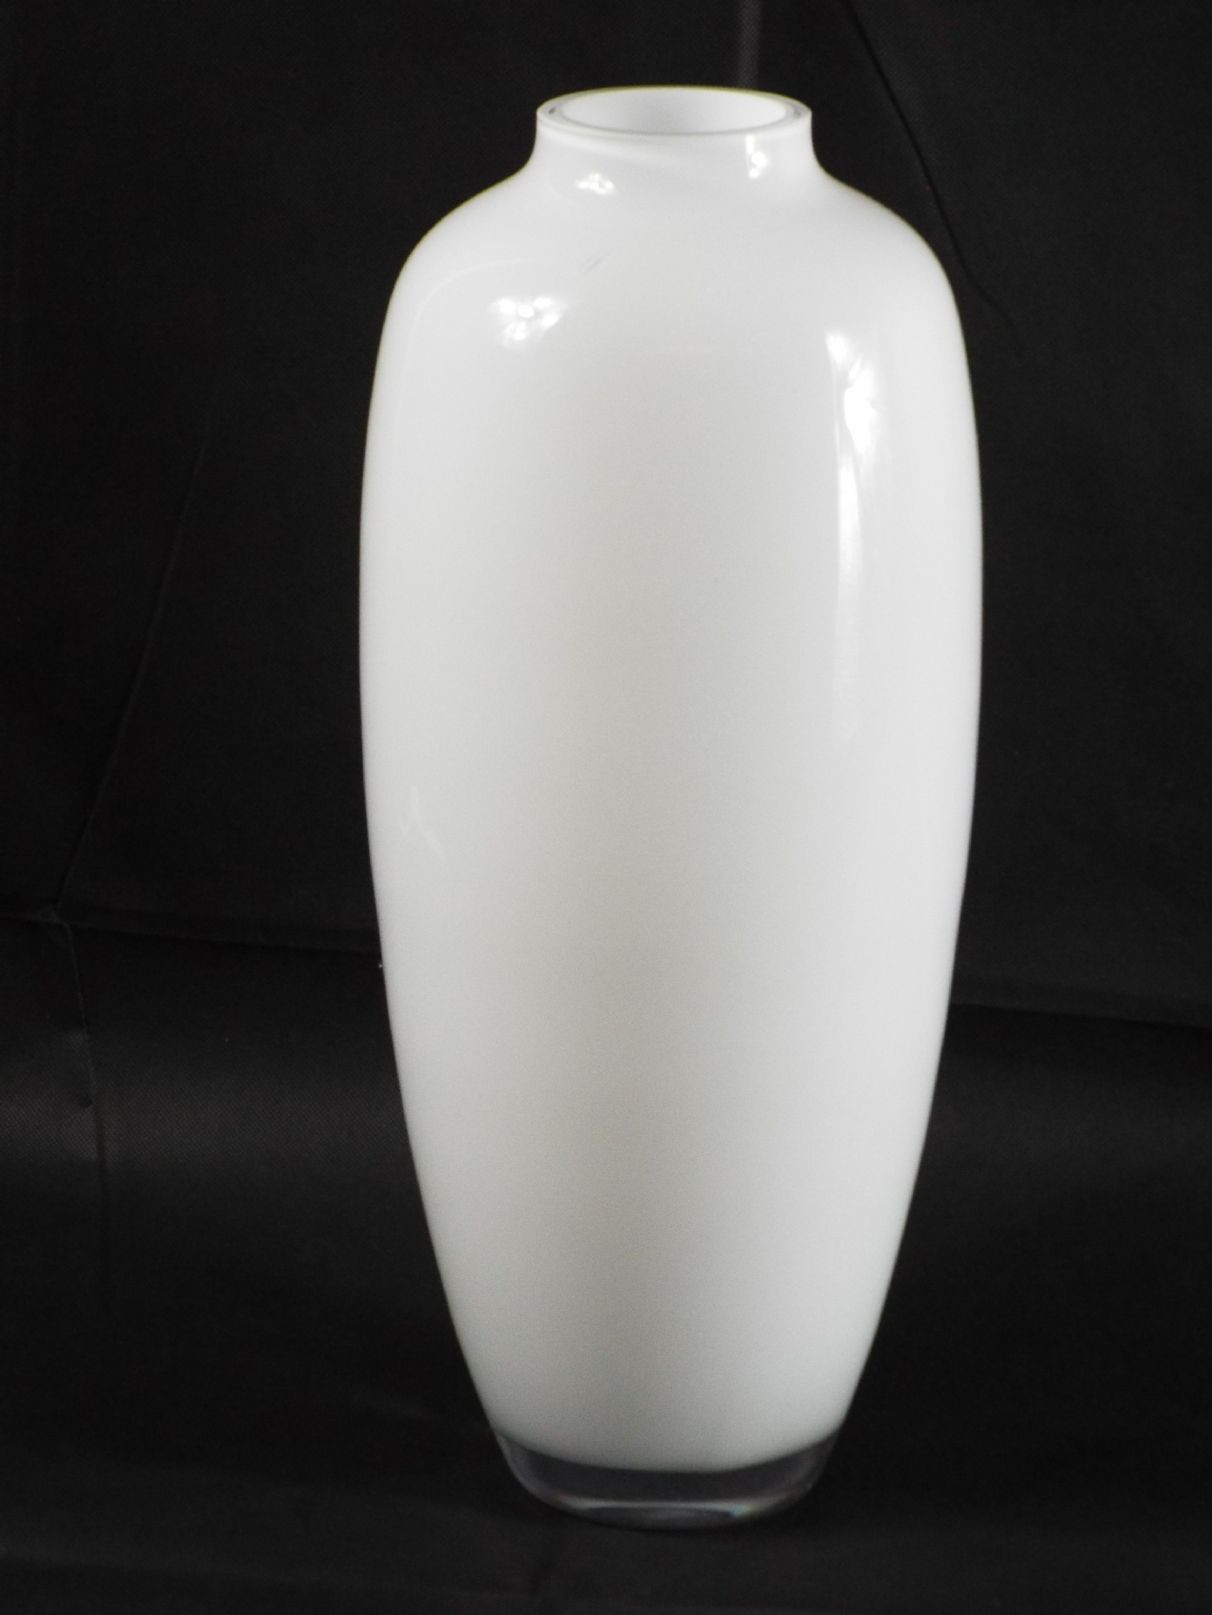 18 Fashionable 30 Inch Tall Floor Vase 2024 free download 30 inch tall floor vase of vases design ideas opal white glass bottle vase buy now at habitat with regard to white glass vase large fourty five centimeter the artistic glasses ltd theartisti